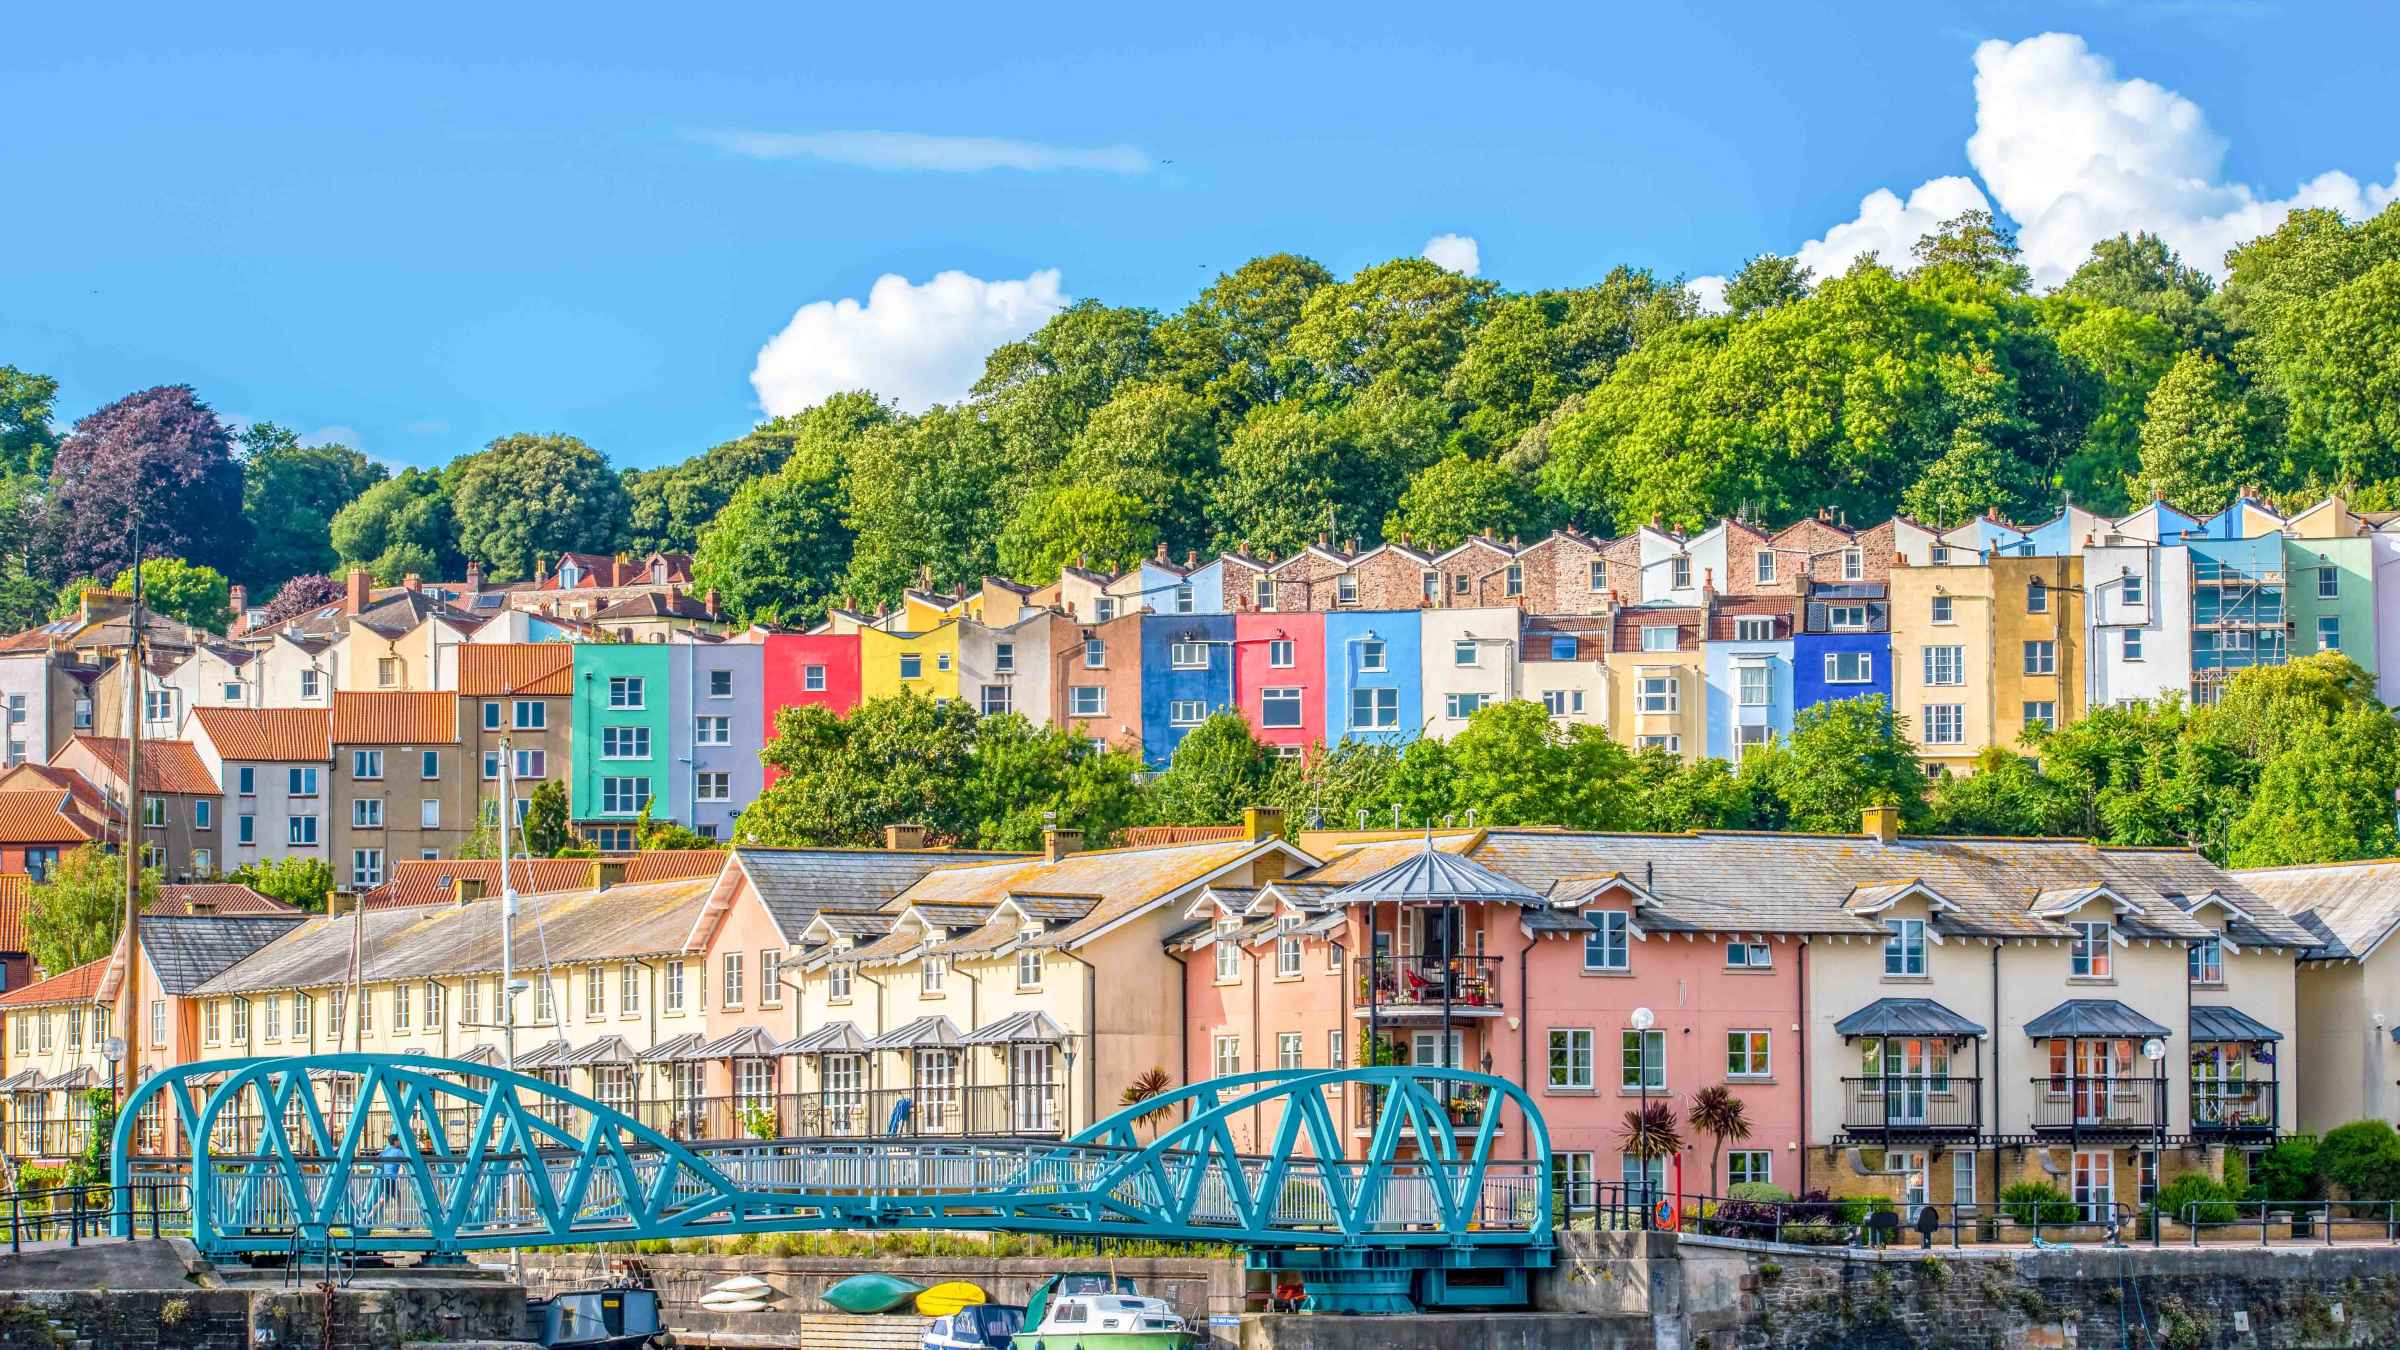 Bristol 2021: Top 10 Tours & Activities (with Photos) - Things to Do in